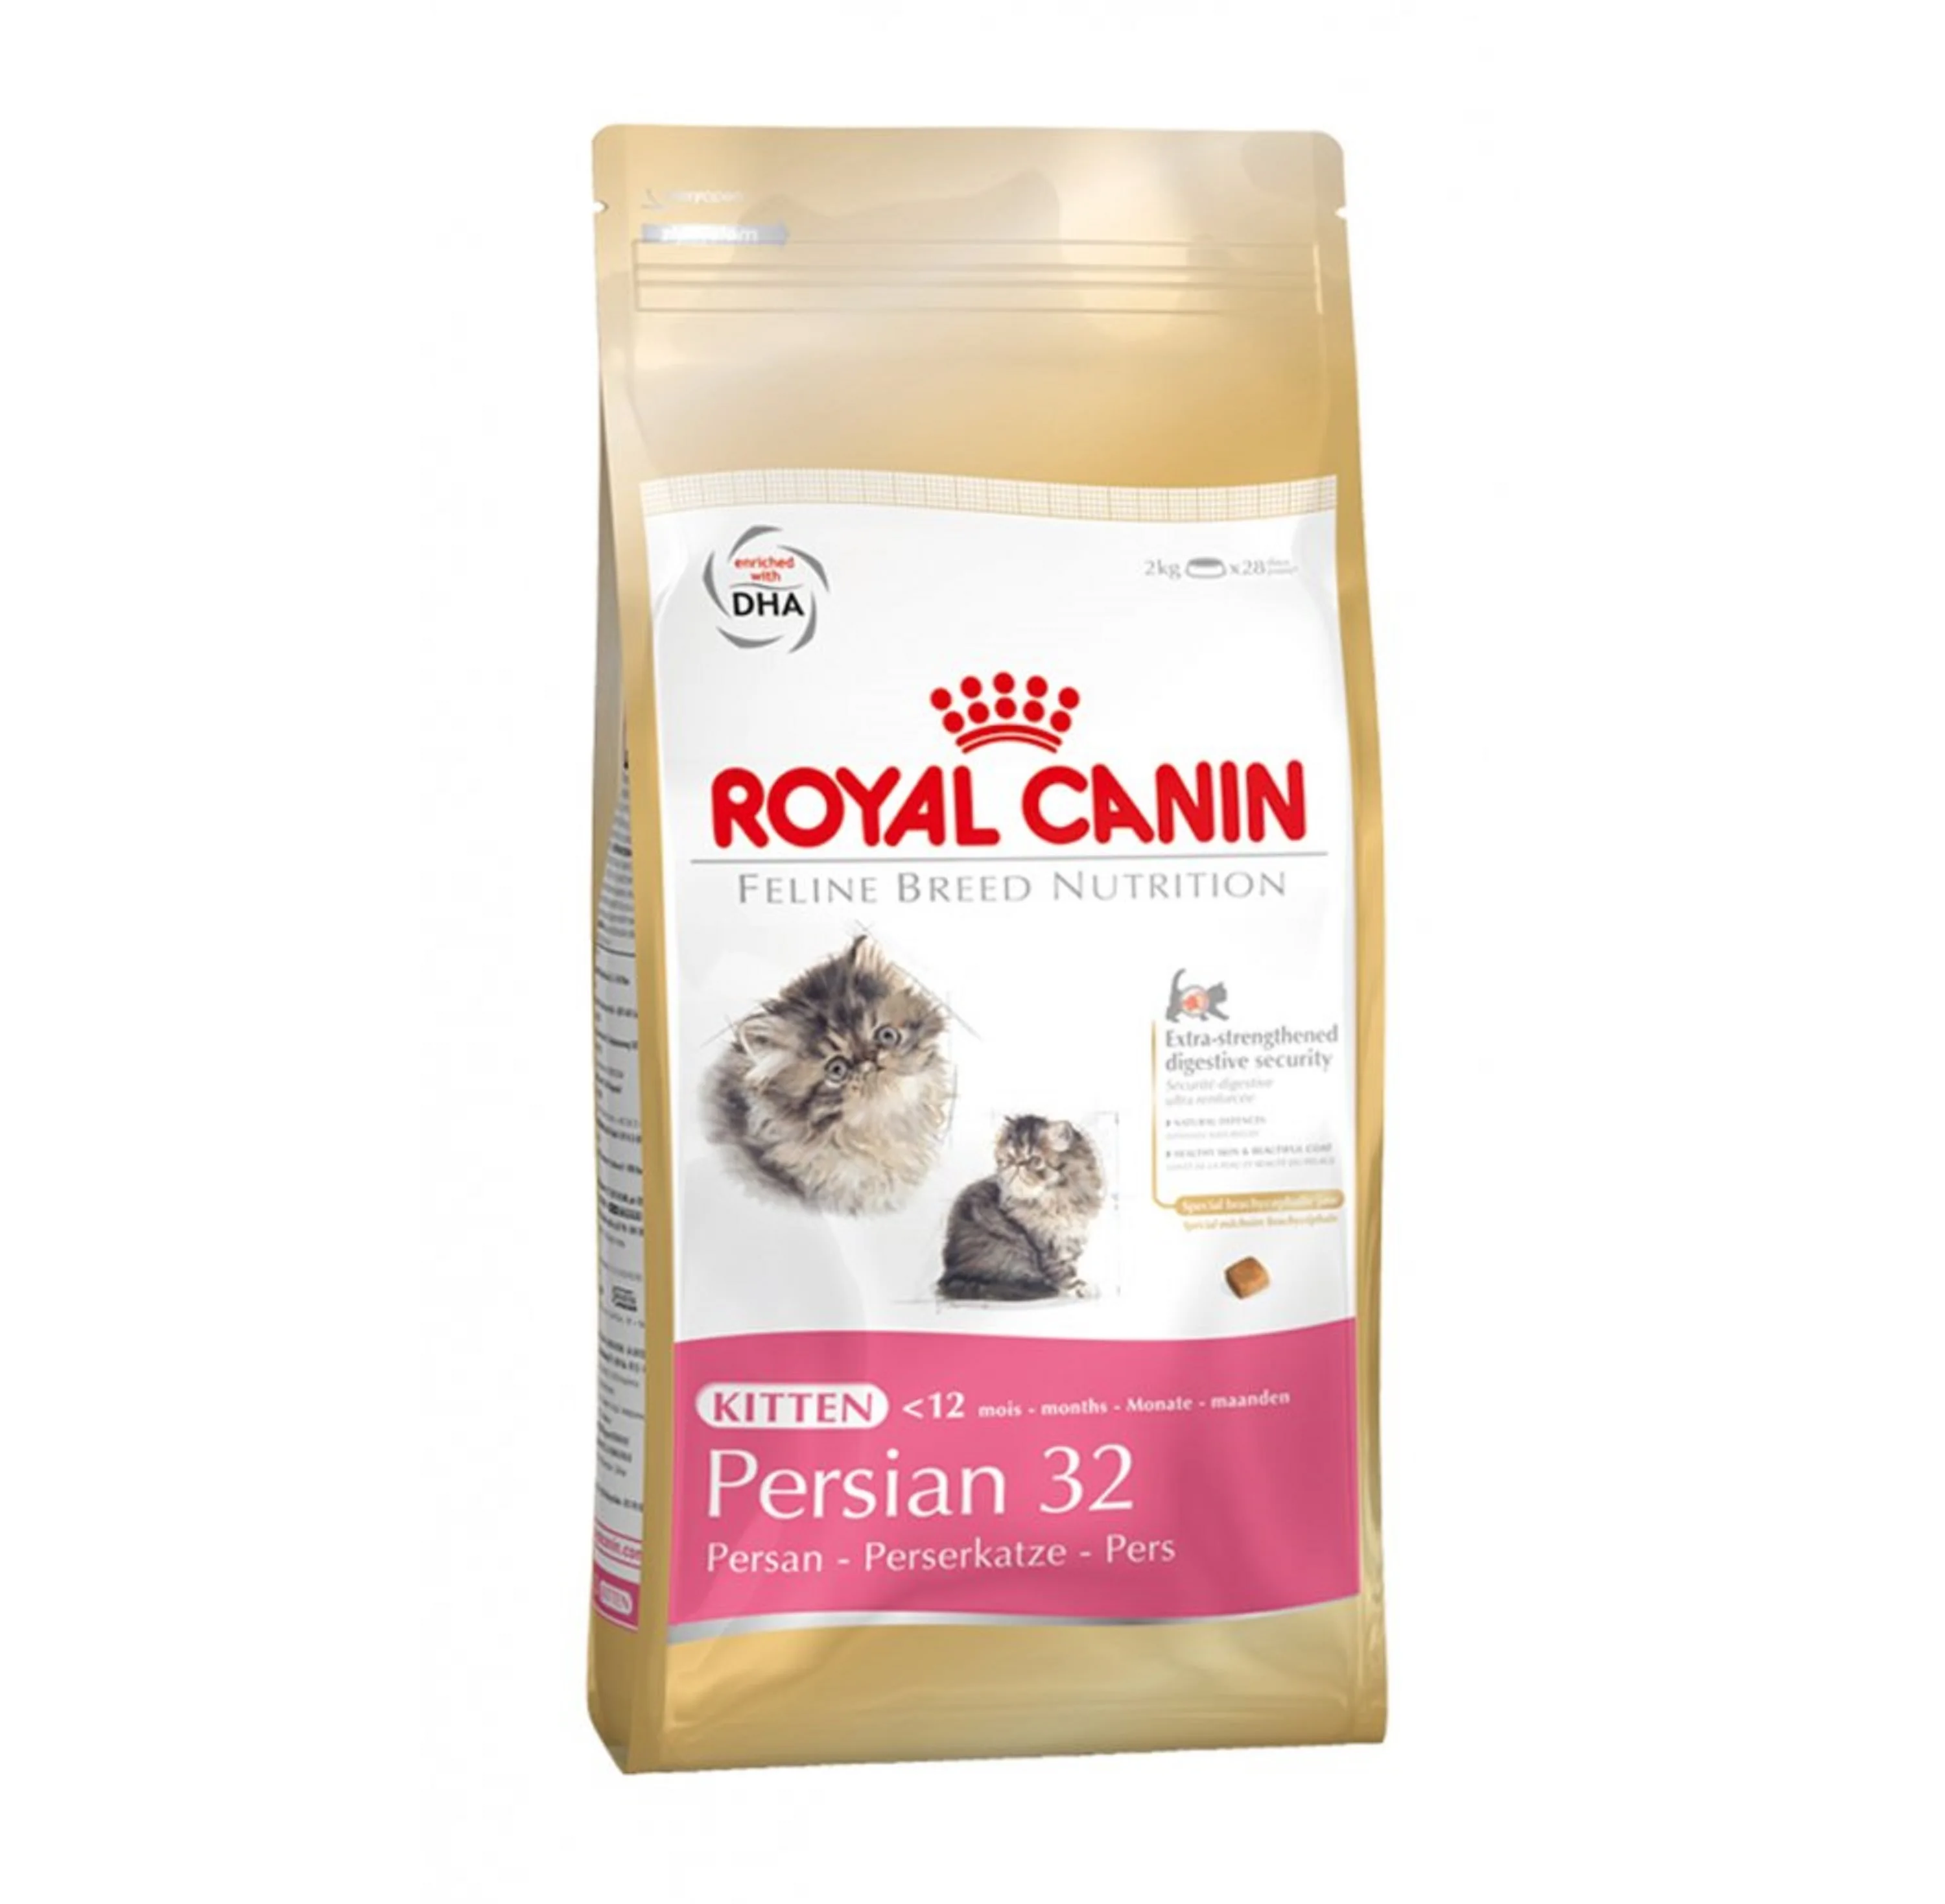 Slink beheerder Oproepen Royal Canin Fit 32 Dry Cats Foods / Royal Canin Maxi Adult Dry Dogs Food -  Buy Bulk Dry Cat Food,Halal Cat Food,Dry Dog Food Product on Alibaba.com